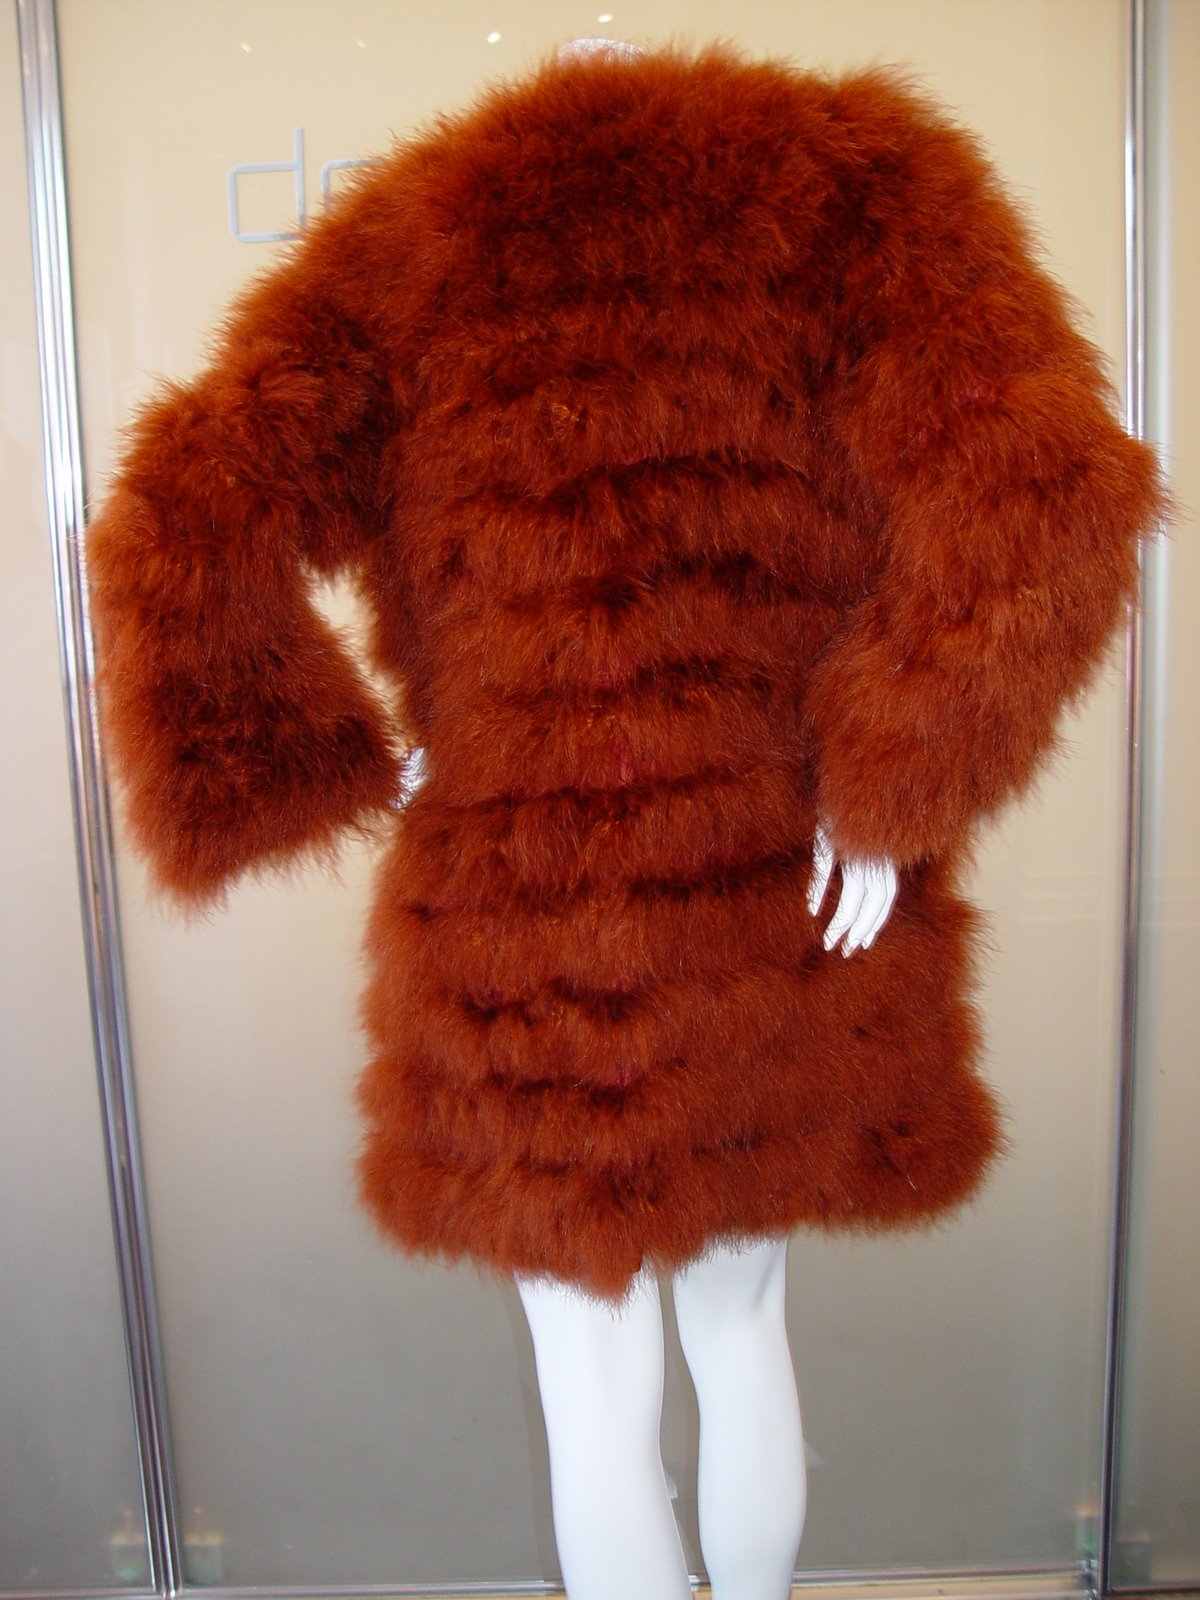 [GIVENCHY+BOUTIQUE+70S+RUST+MARIBOU+FEATHER+CHUBBY.JPG.JPG]